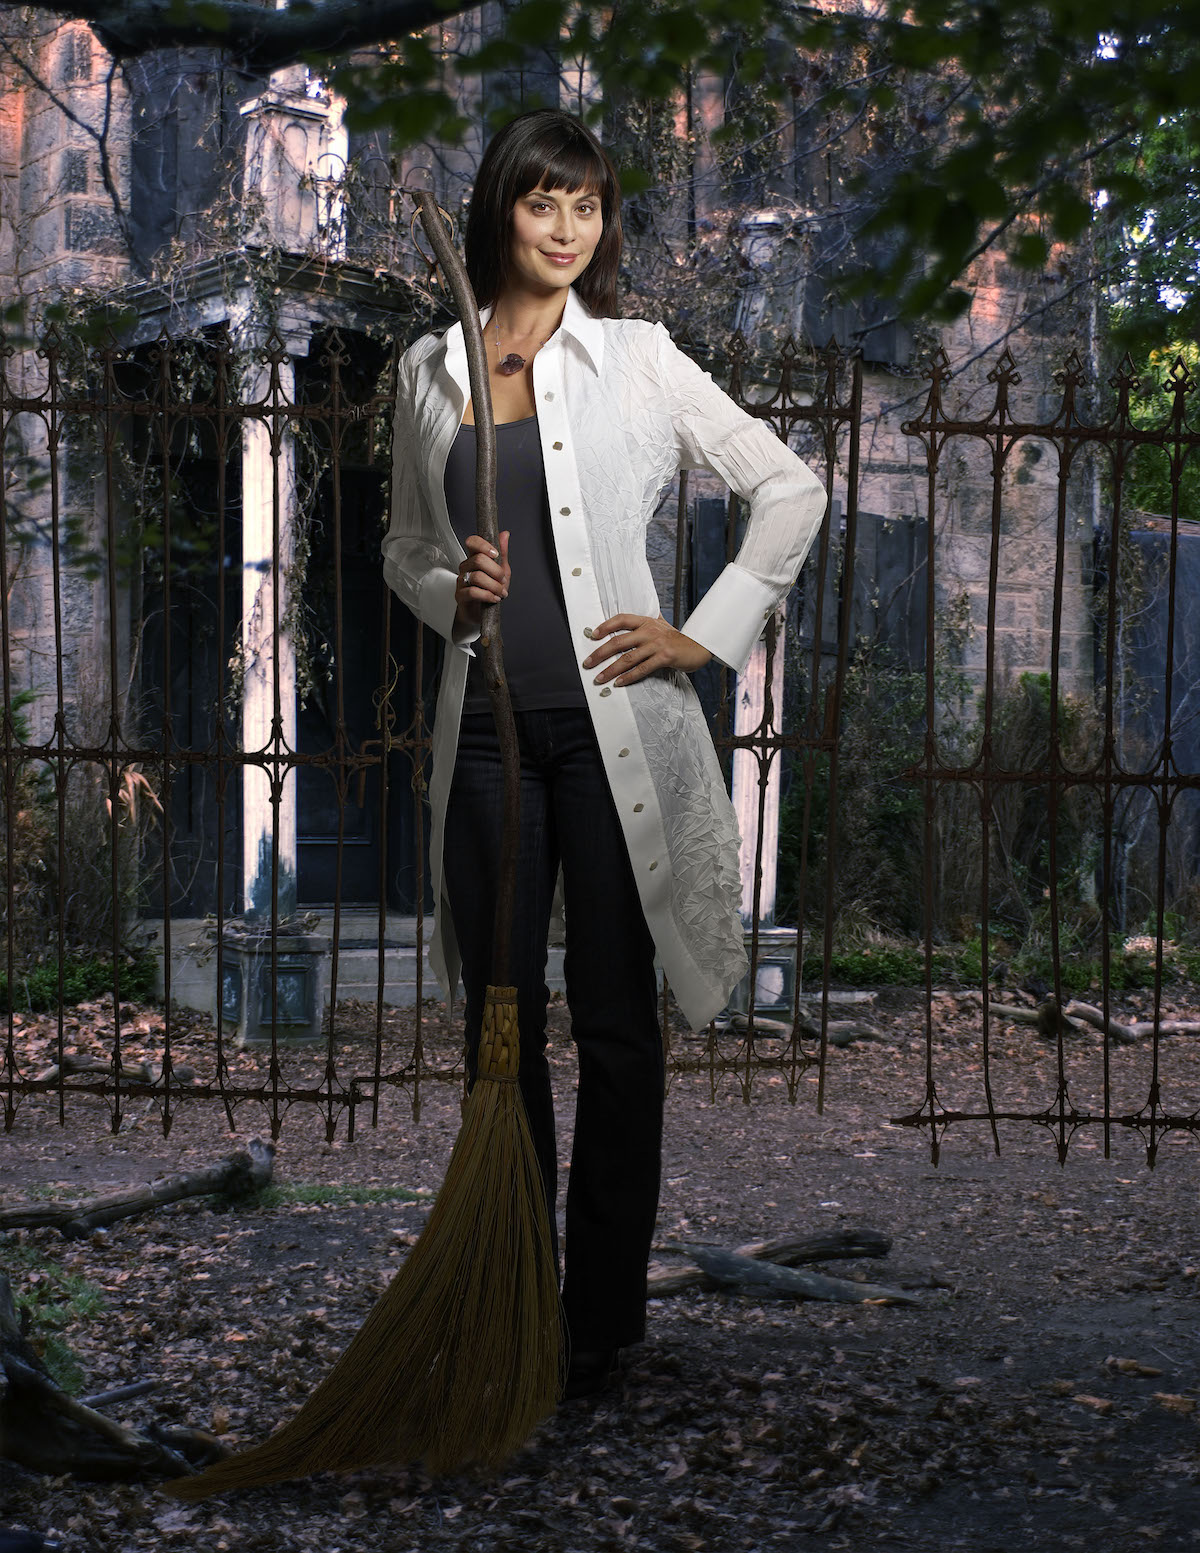 Catherine Bell as Cassie Nightingale, holding a broom, in 'The Good Witch'